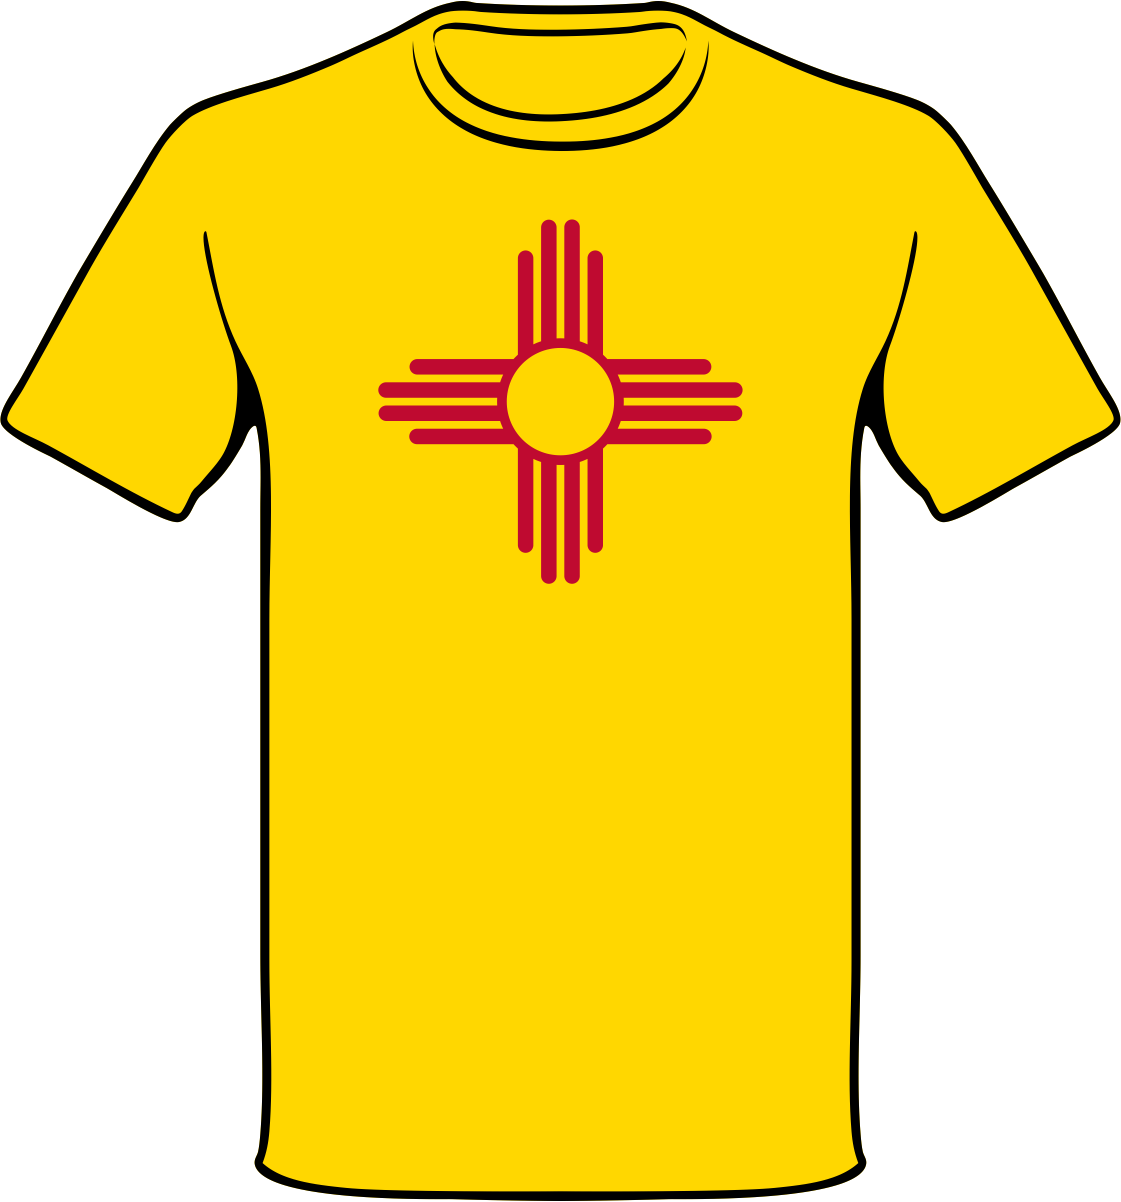 A Yellow Shirt With A Red Symbol On It